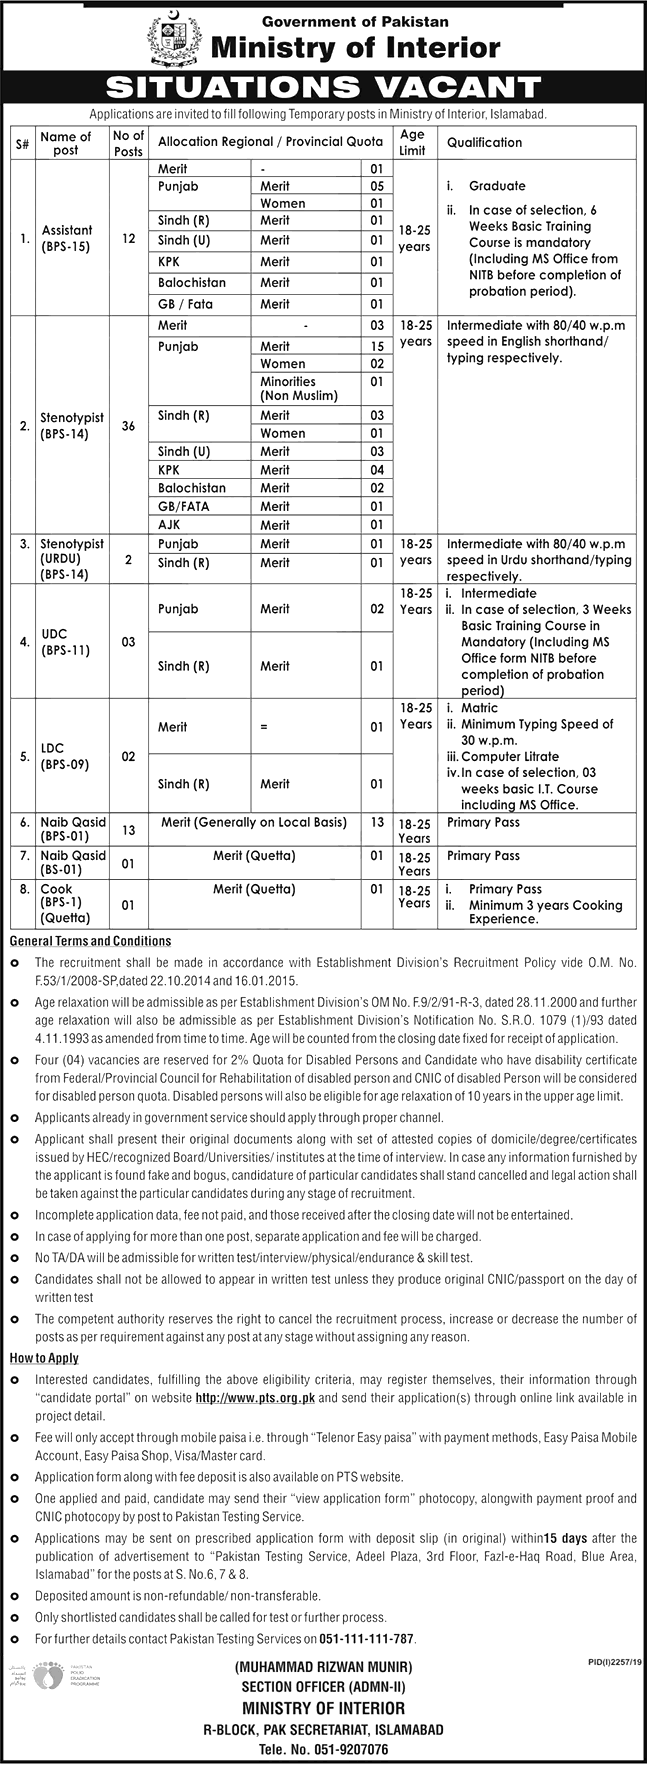 Ministry of Interior PTS Jobs 2019 Apply Online Roll No Slips